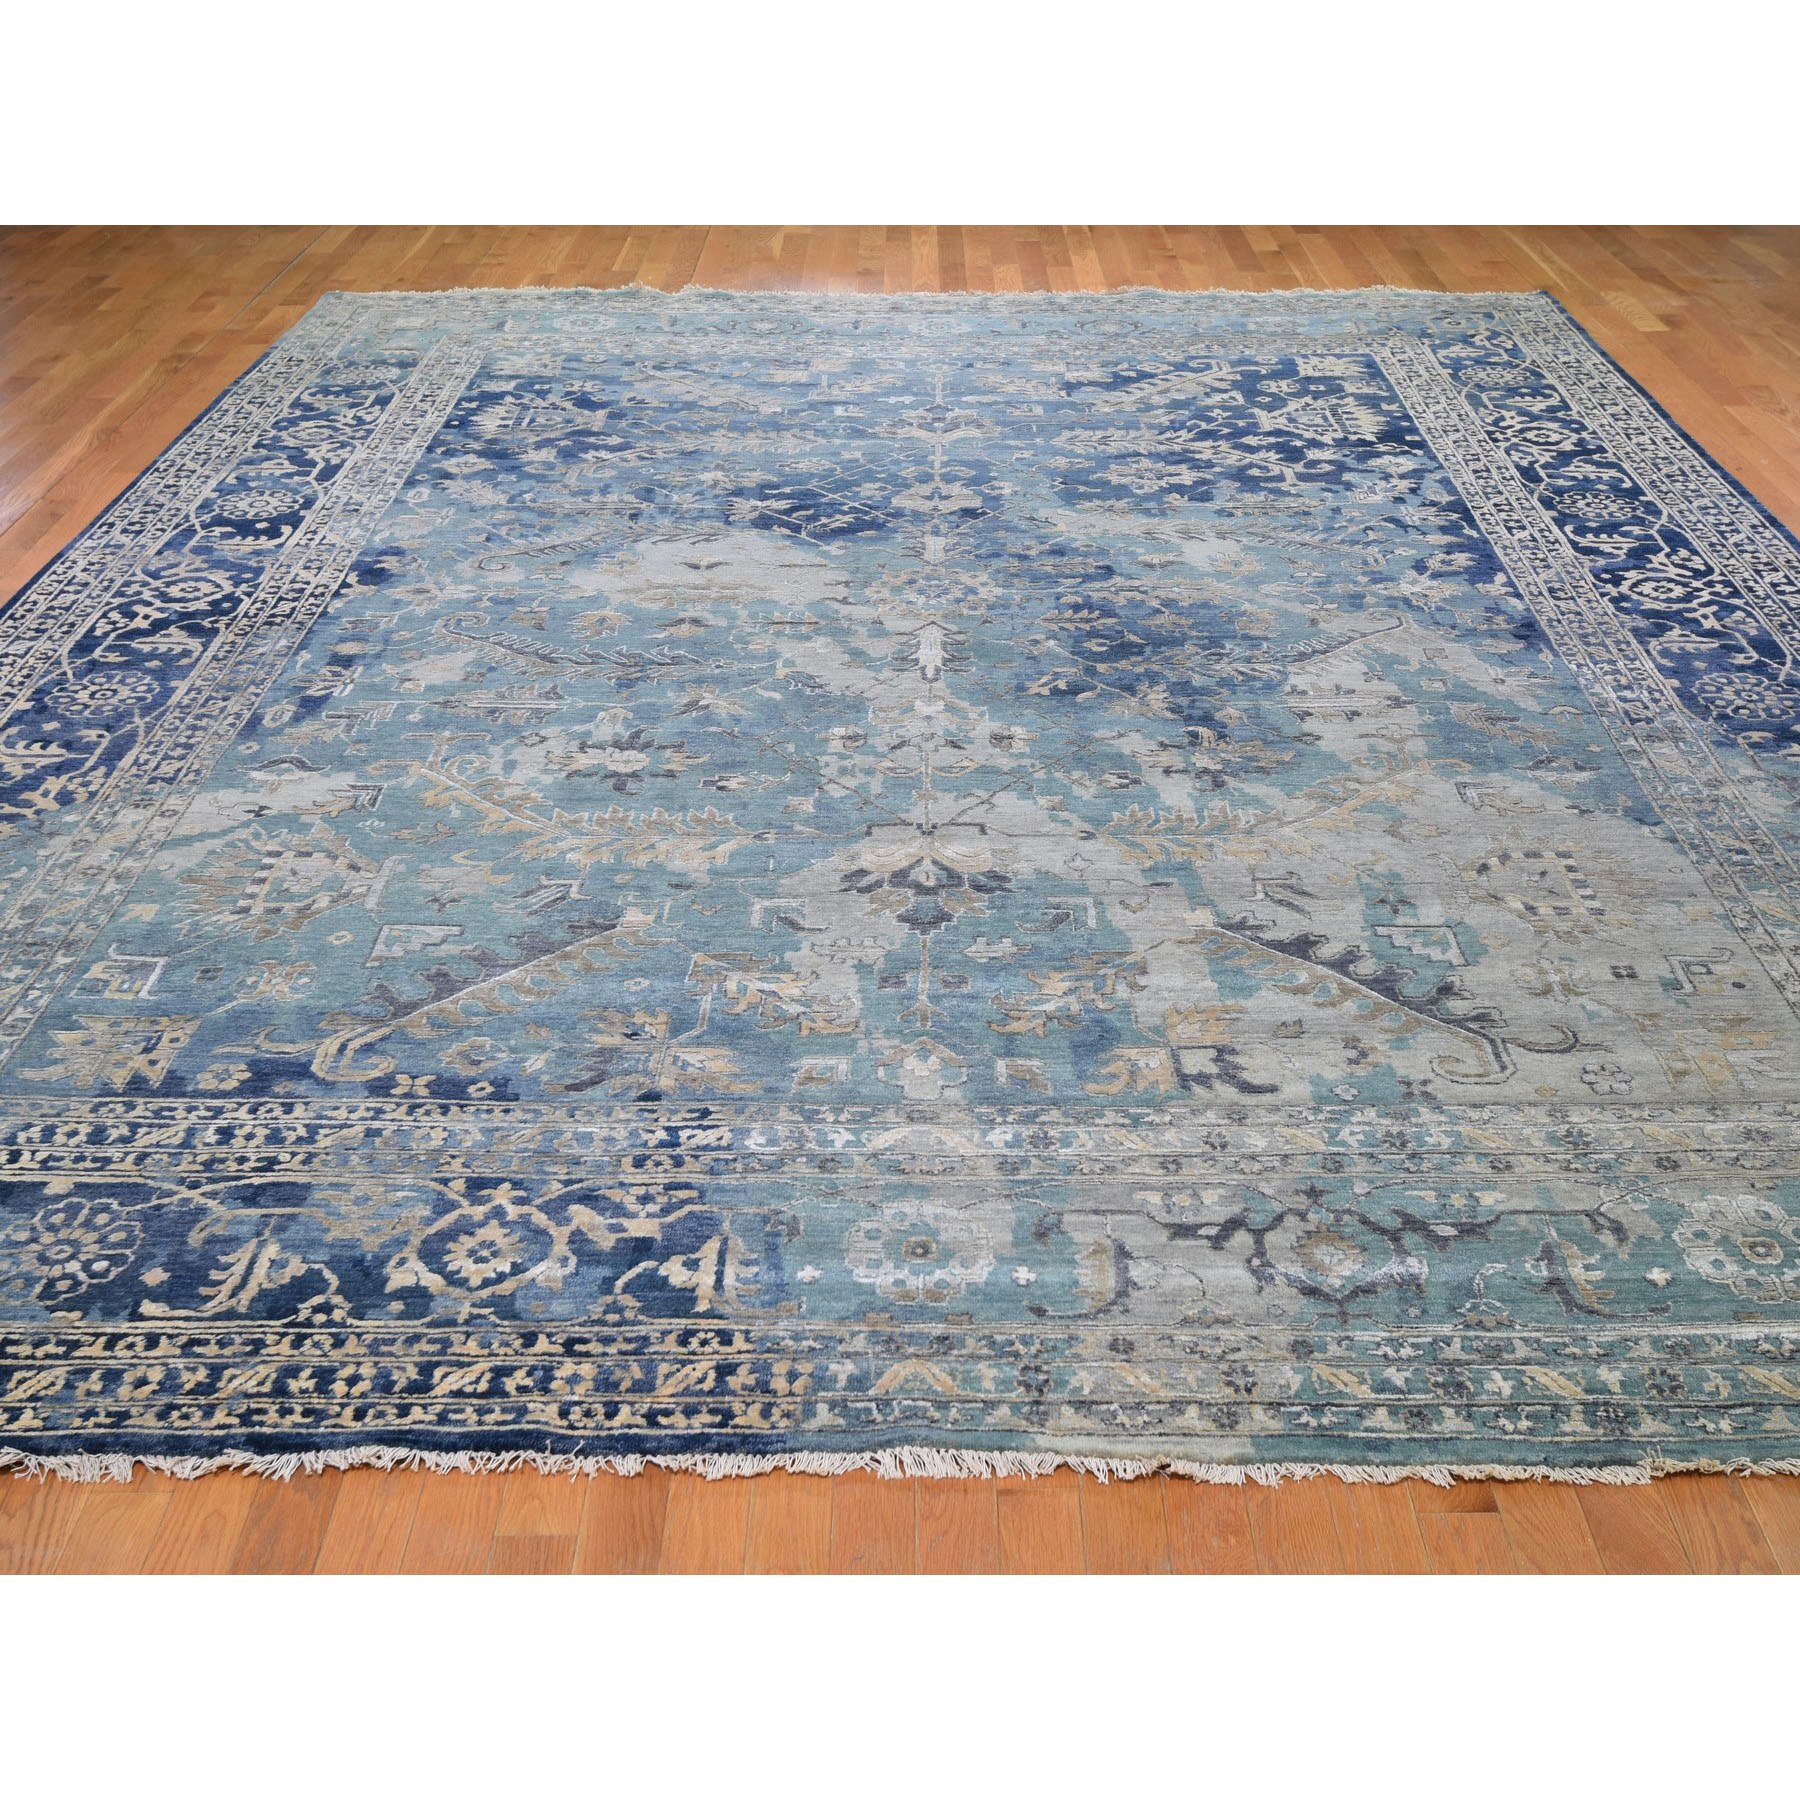 11-9 x14-9  Oversized Broken Persian Heriz All Over Design Wool And Silk Hand Knotted Oriental Rug 